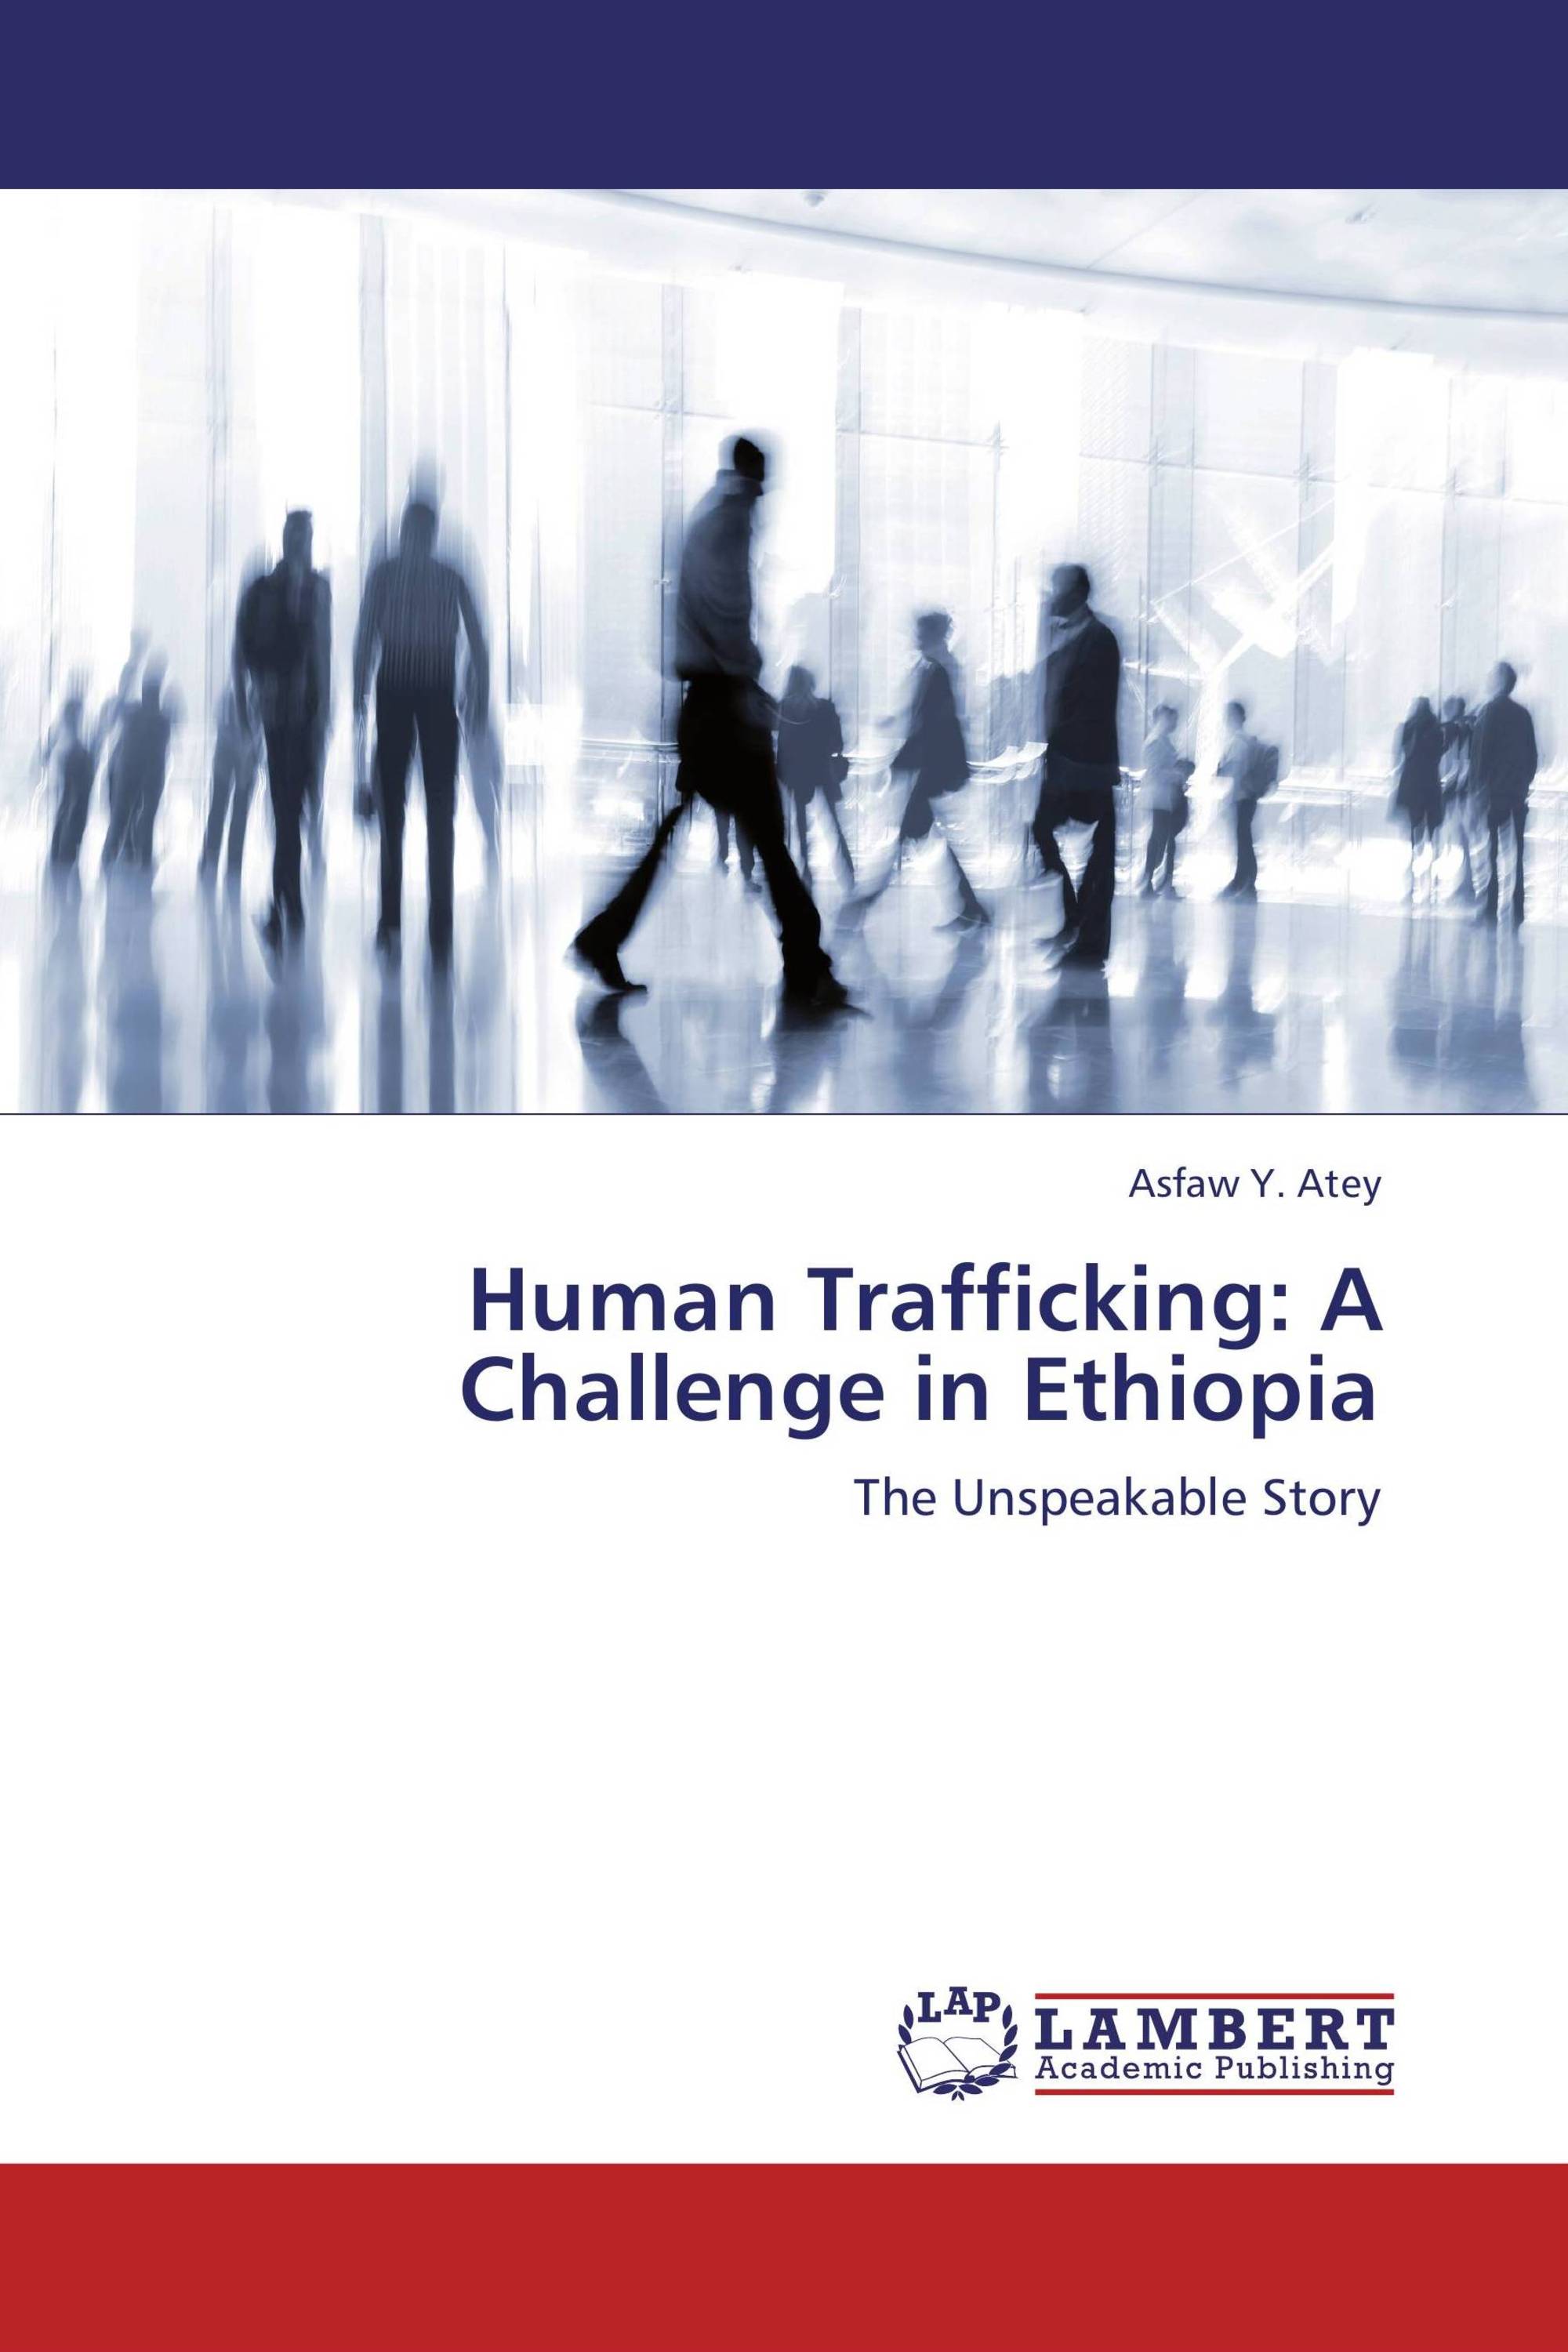 Human Trafficking: A Challenge in Ethiopia